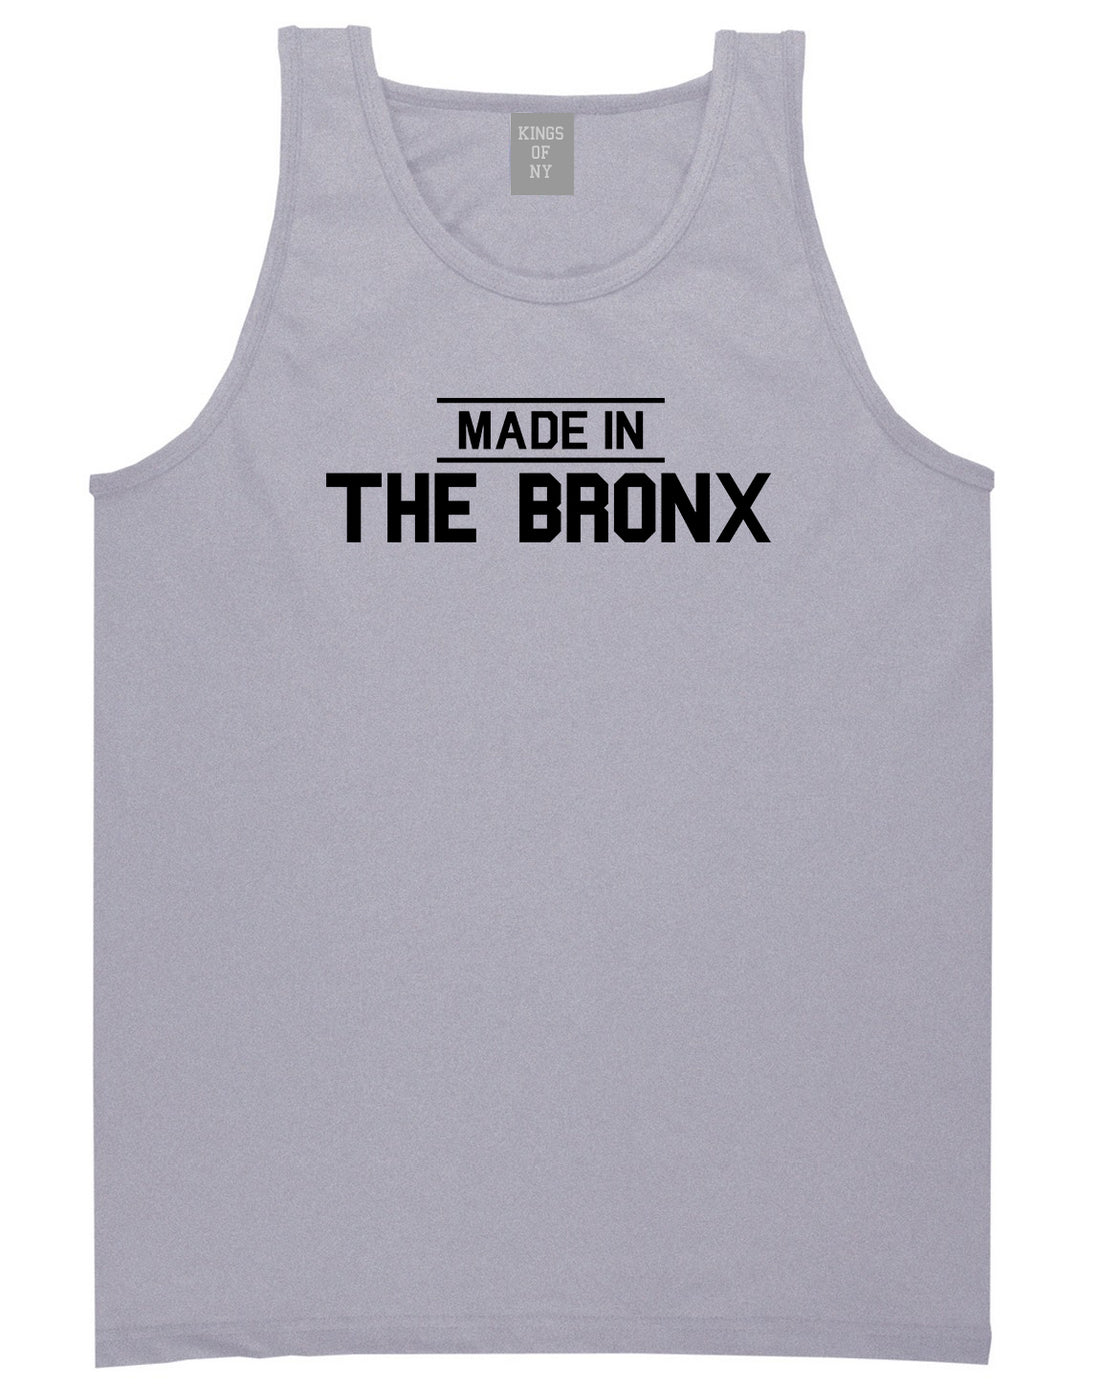 Made In The Bronx Mens Tank Top Shirt Grey by Kings Of NY